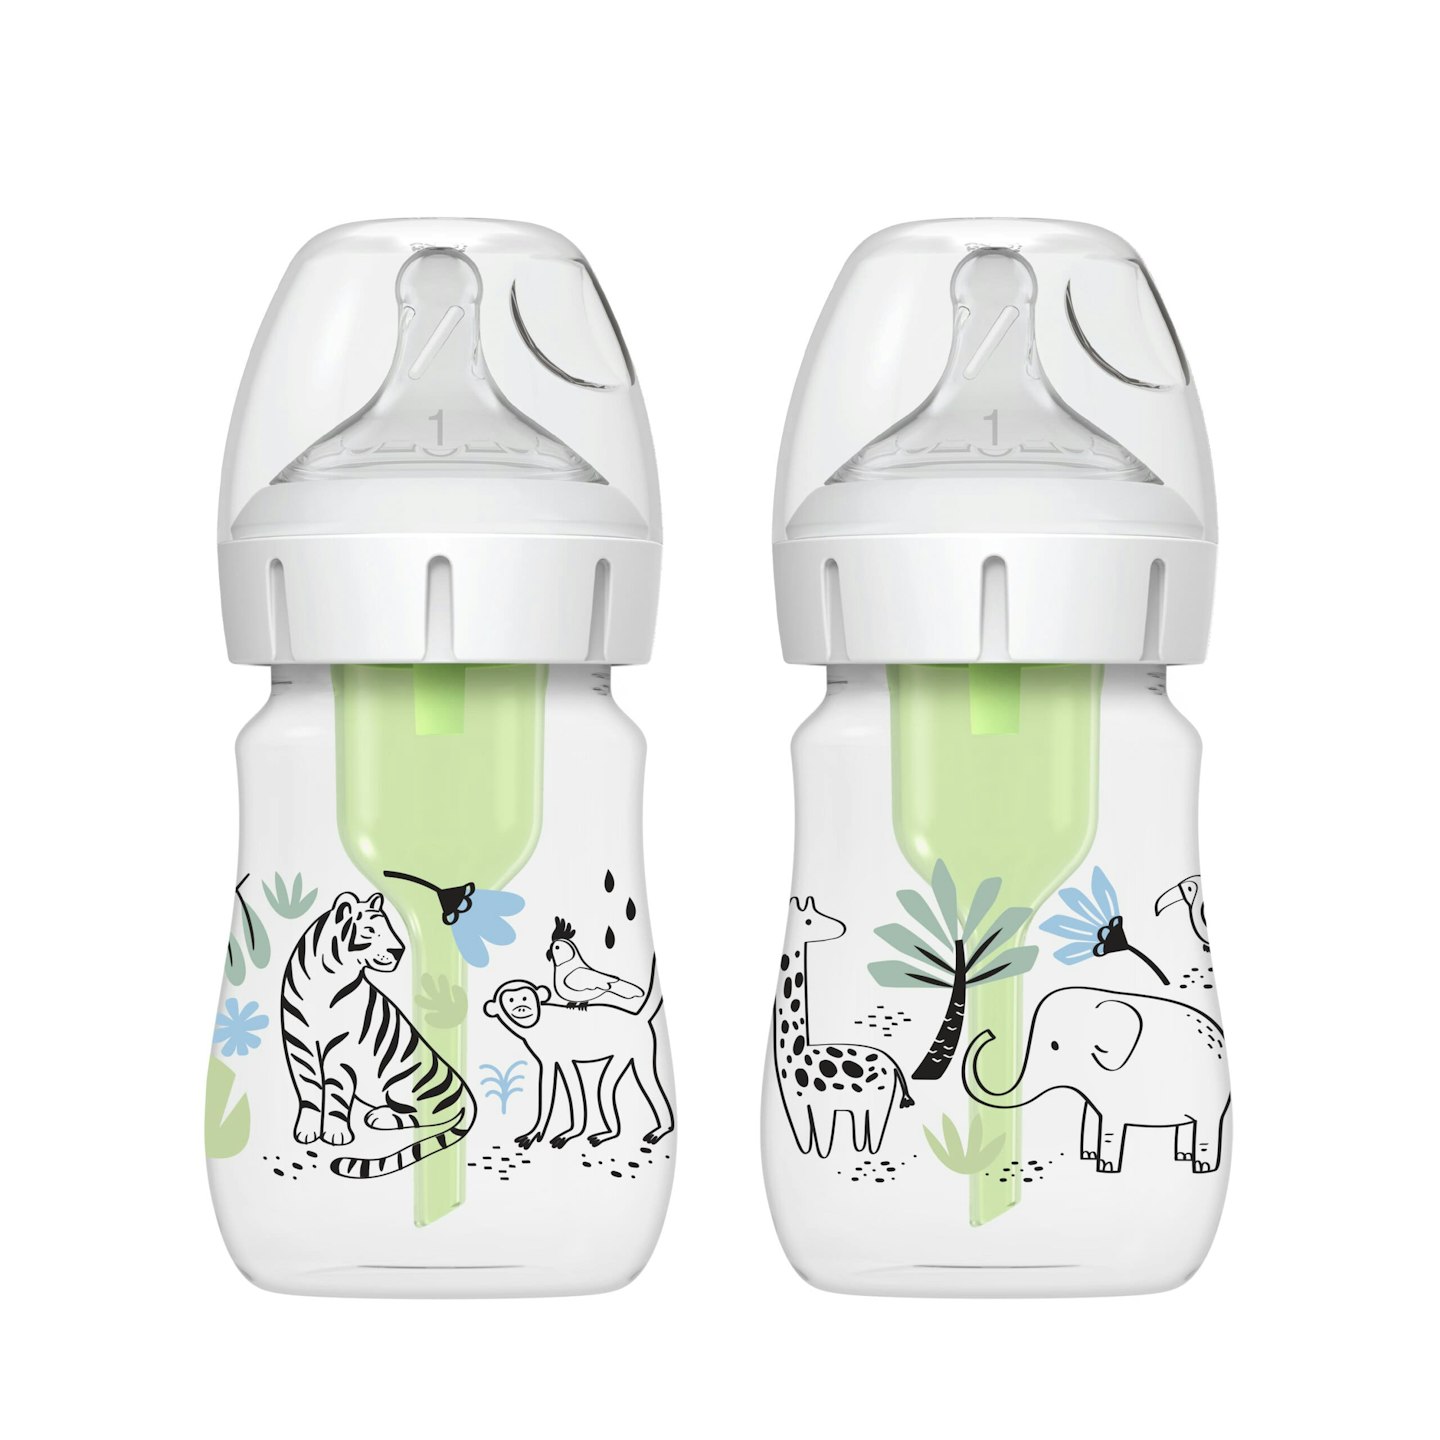 Dr Brown’s Anti-Colic Options+ Wide-Neck Baby Bottle